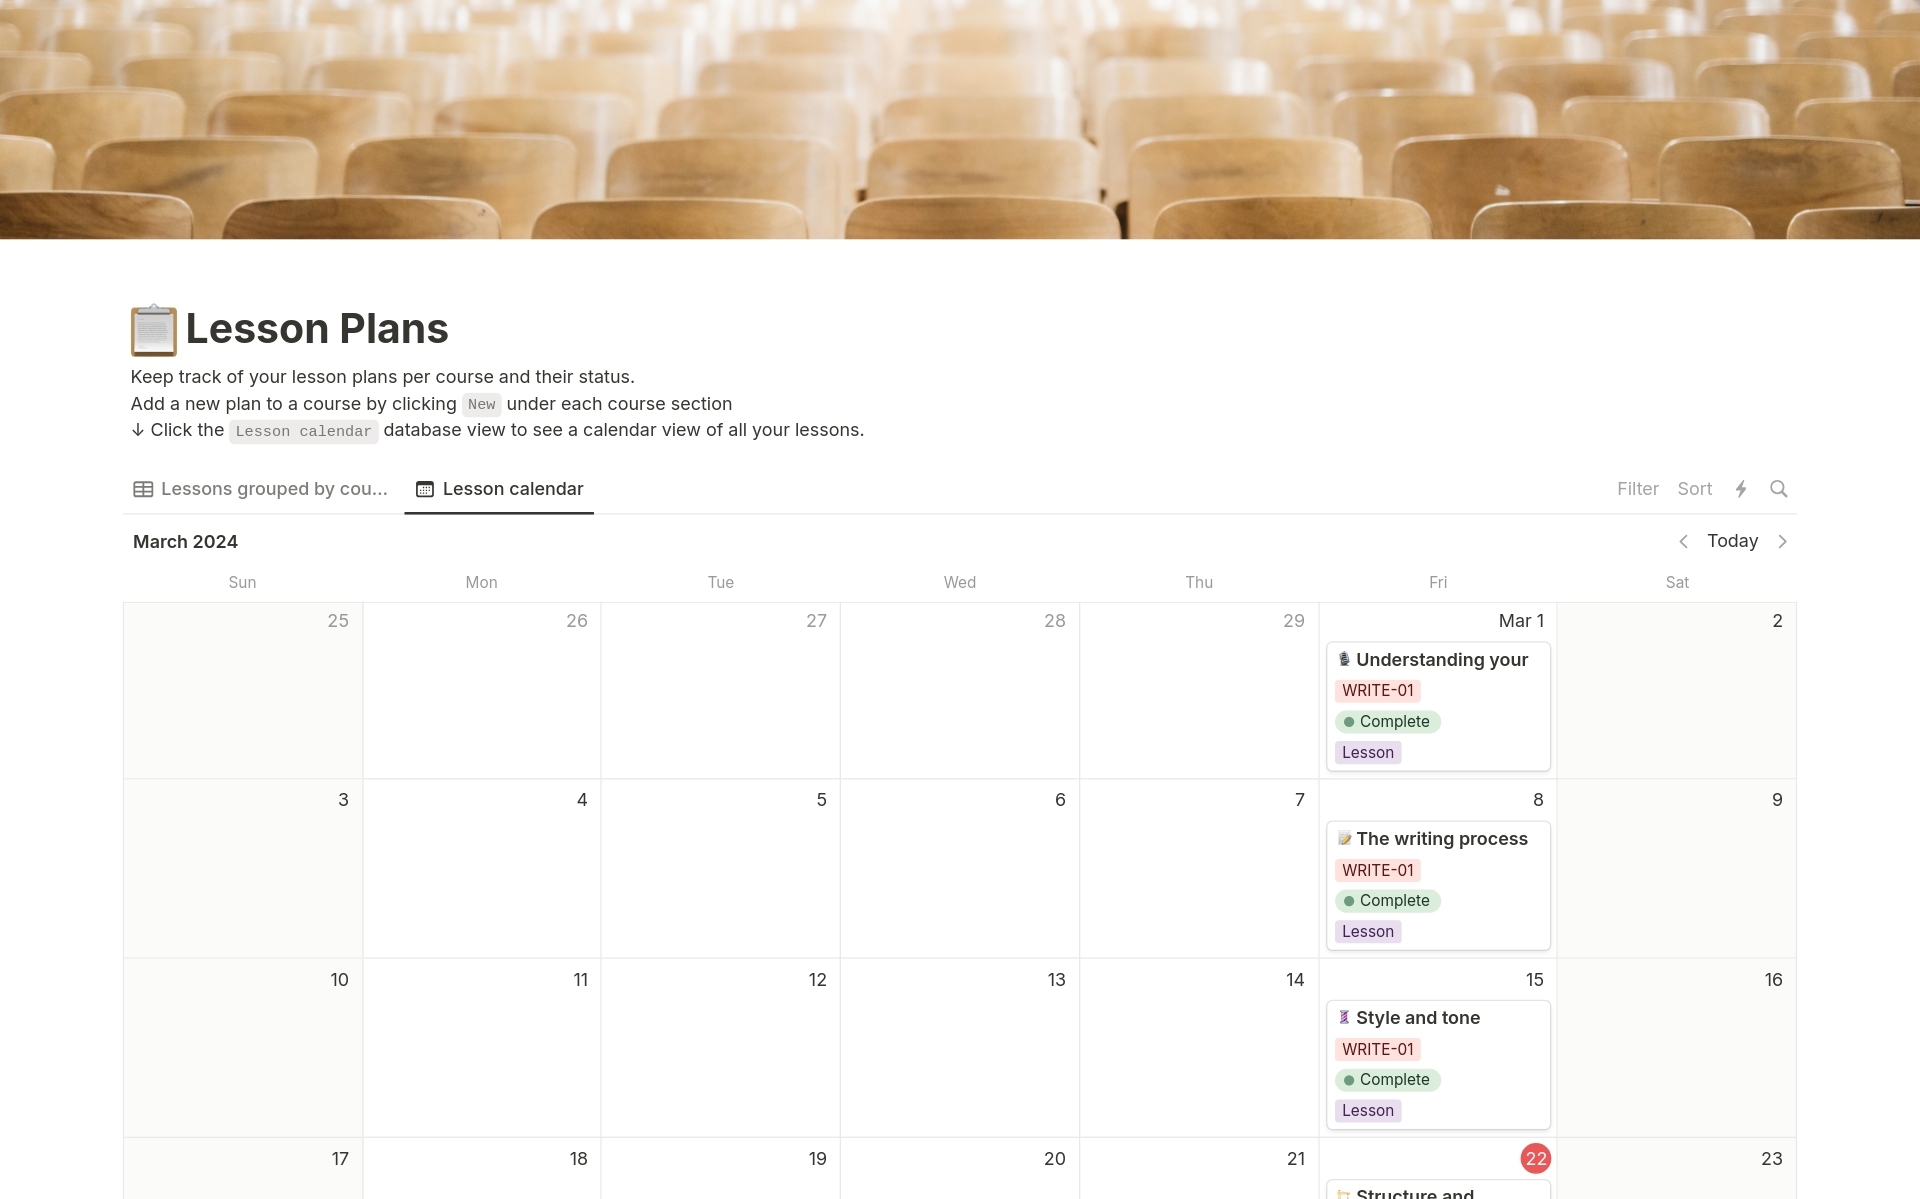 Effortlessly manage your teaching agenda with our Lesson Plans template. Track and update the status of your lessons for each course, and view your entire teaching schedule at a glance. Add, organize, and plan your lessons with ease to stay on top of your teaching game.